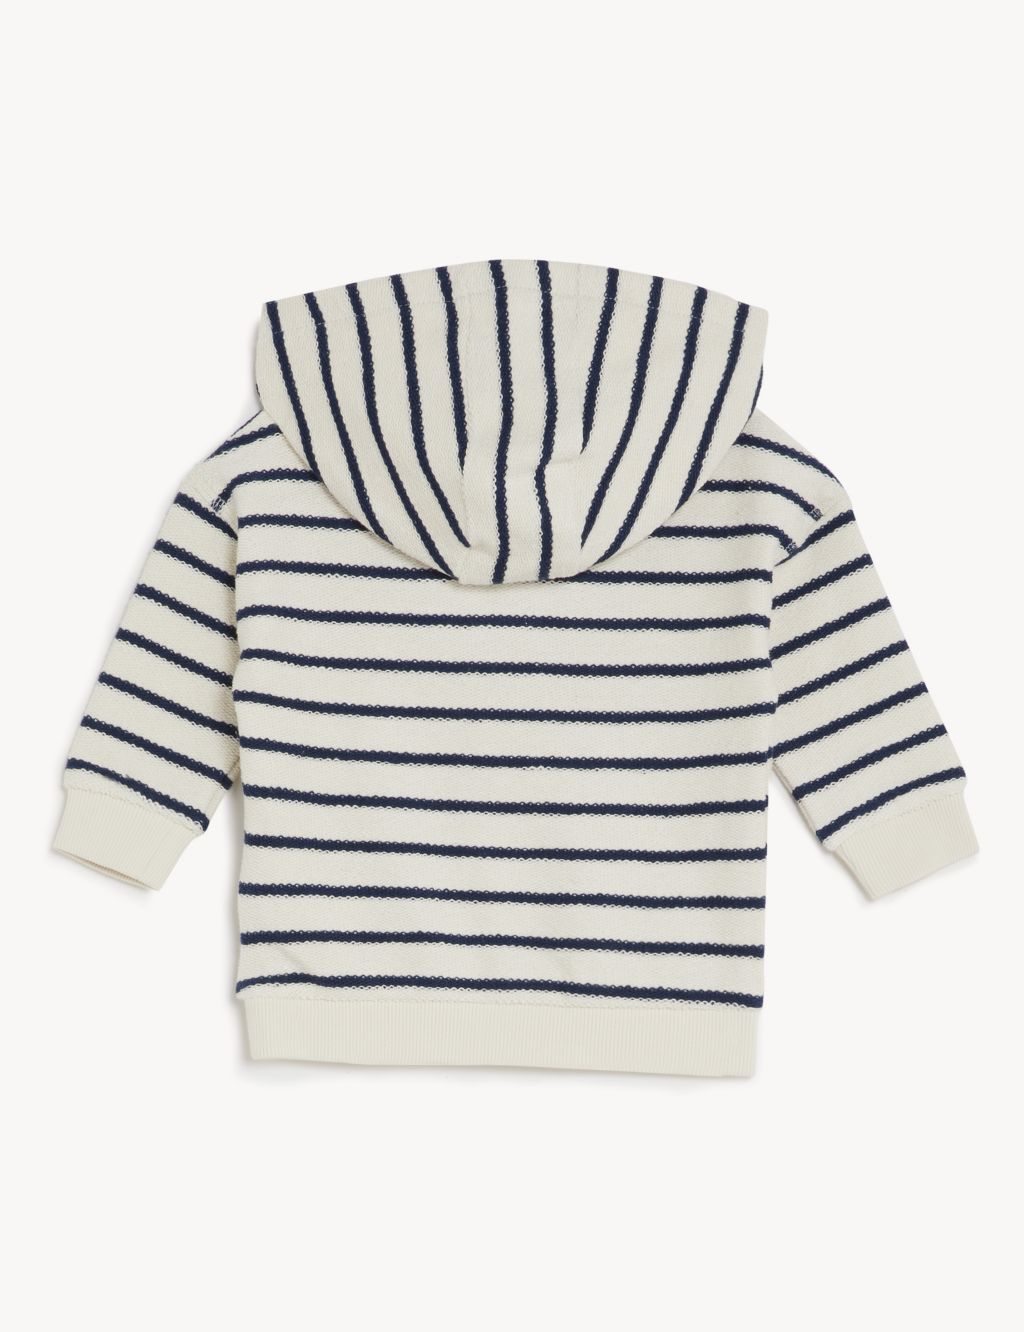 Cotton Rich Hooded Striped Sweater (0-3 Yrs) image 2